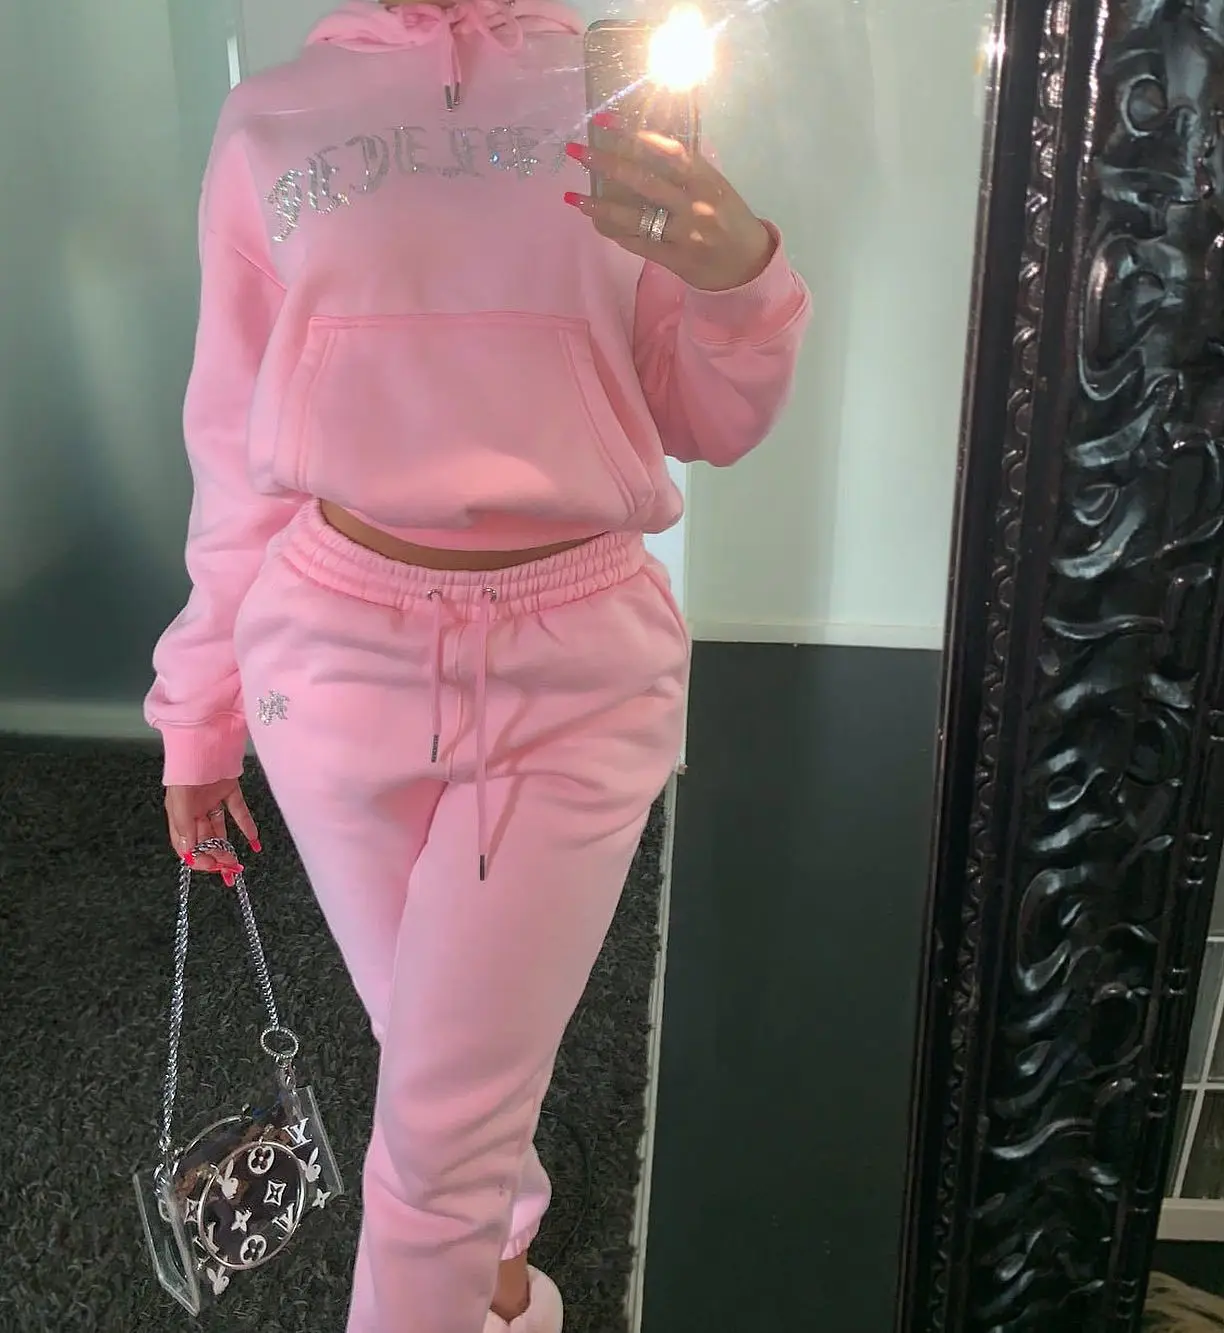 

Custom Design Logo womens Tracksuits Conjunto Mujer Pantalon Diamond Track Suits Joggers Hoodies Rhinestone bling Sweatsuit Set/, As shown in the picture or customized